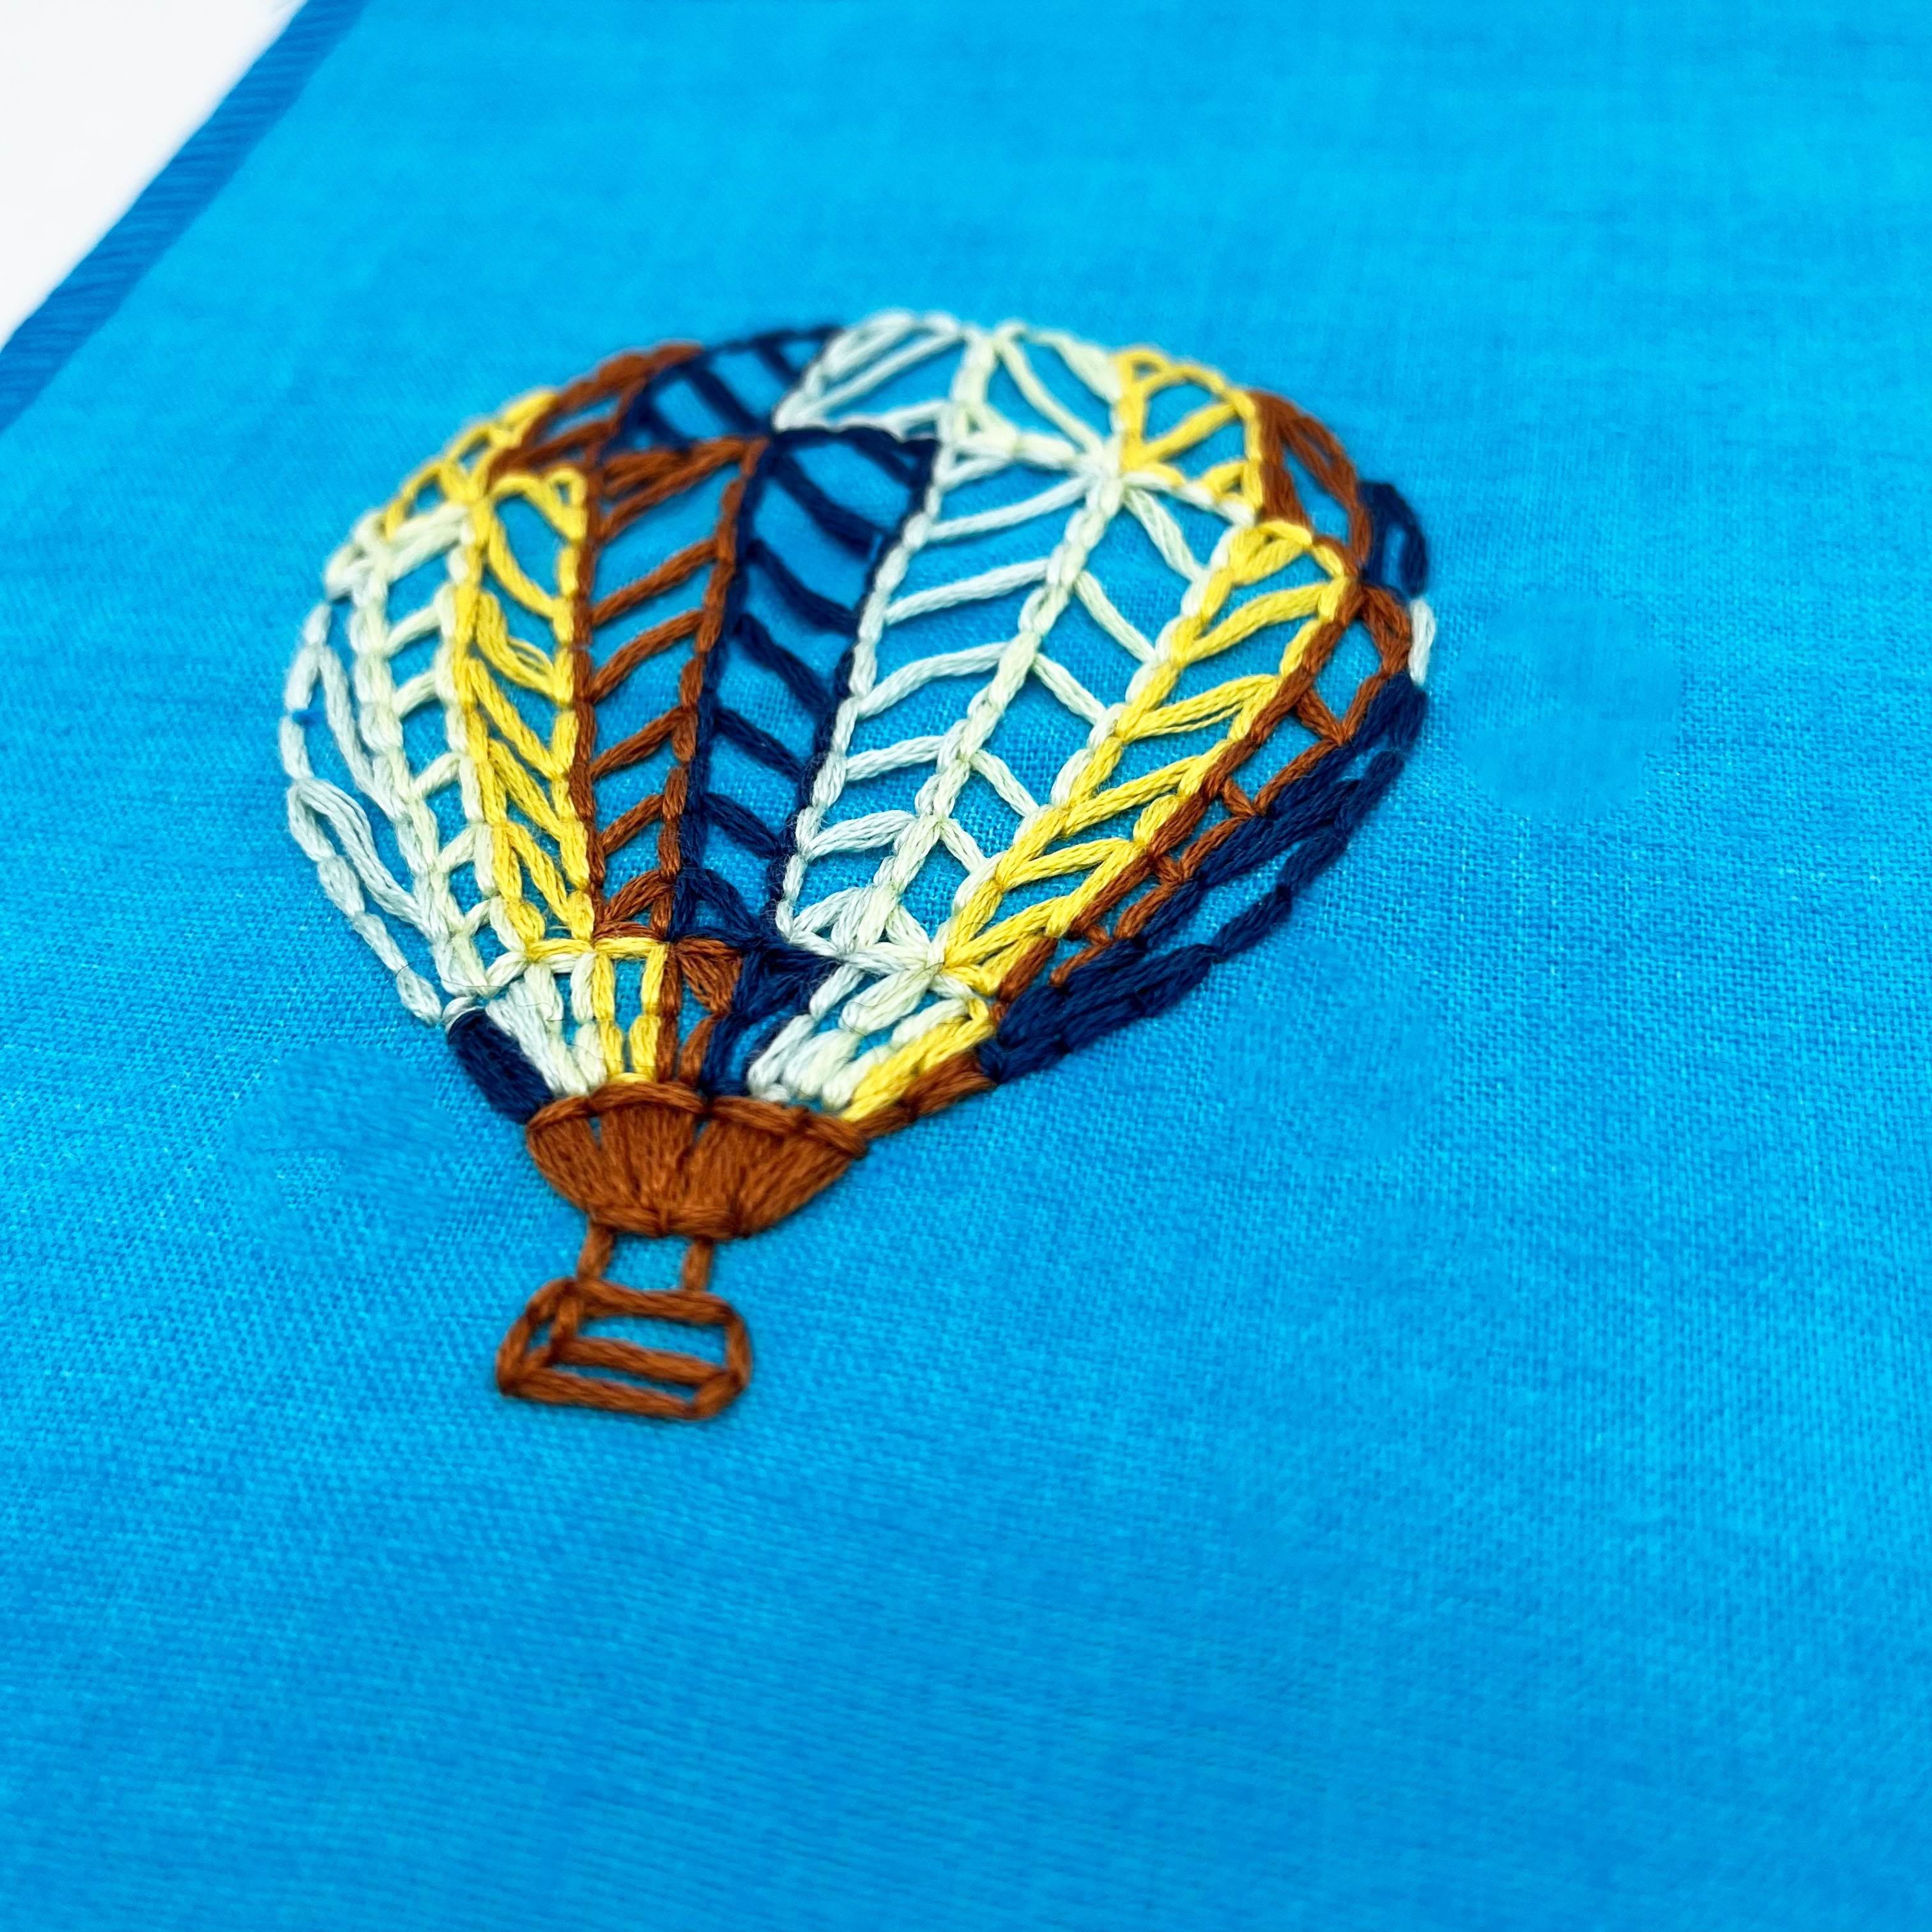 Wall Hanging- Hand Embroidered Hot Air Balloon on Bright Blue